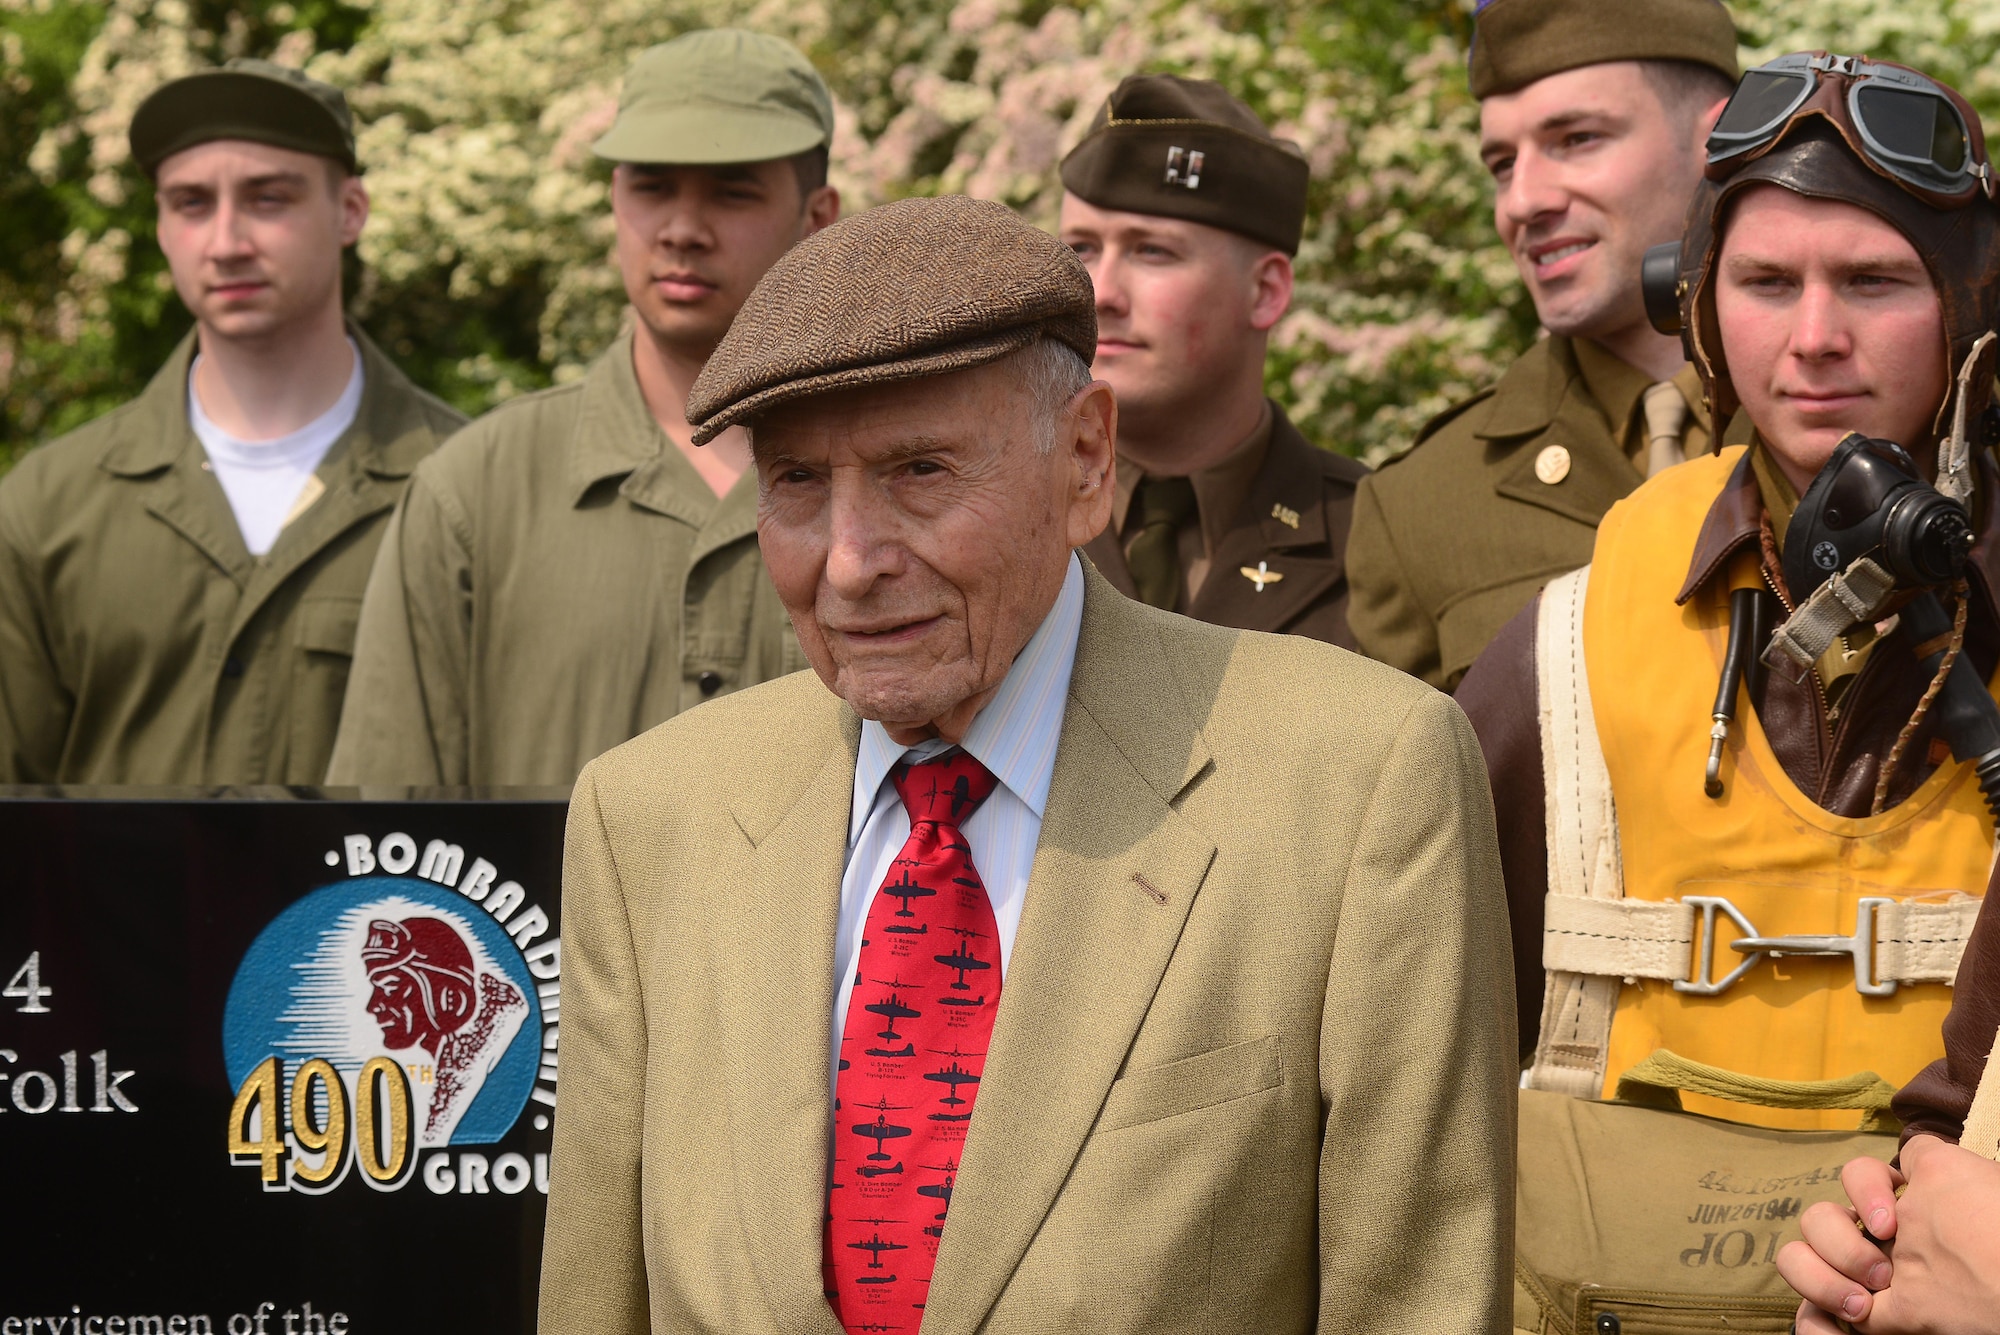 92-year-old veteran Si Spiegel, poses for photographs with Airmen from the 48th Fighter Wing May 29, in the village of Brome, England. Spiegel flew 35 missions with the 490th Bomb Group and is believed to be the last surviving member of the unit. (U.S. Air Force photo/ Tech Sgt. Matthew Plew)